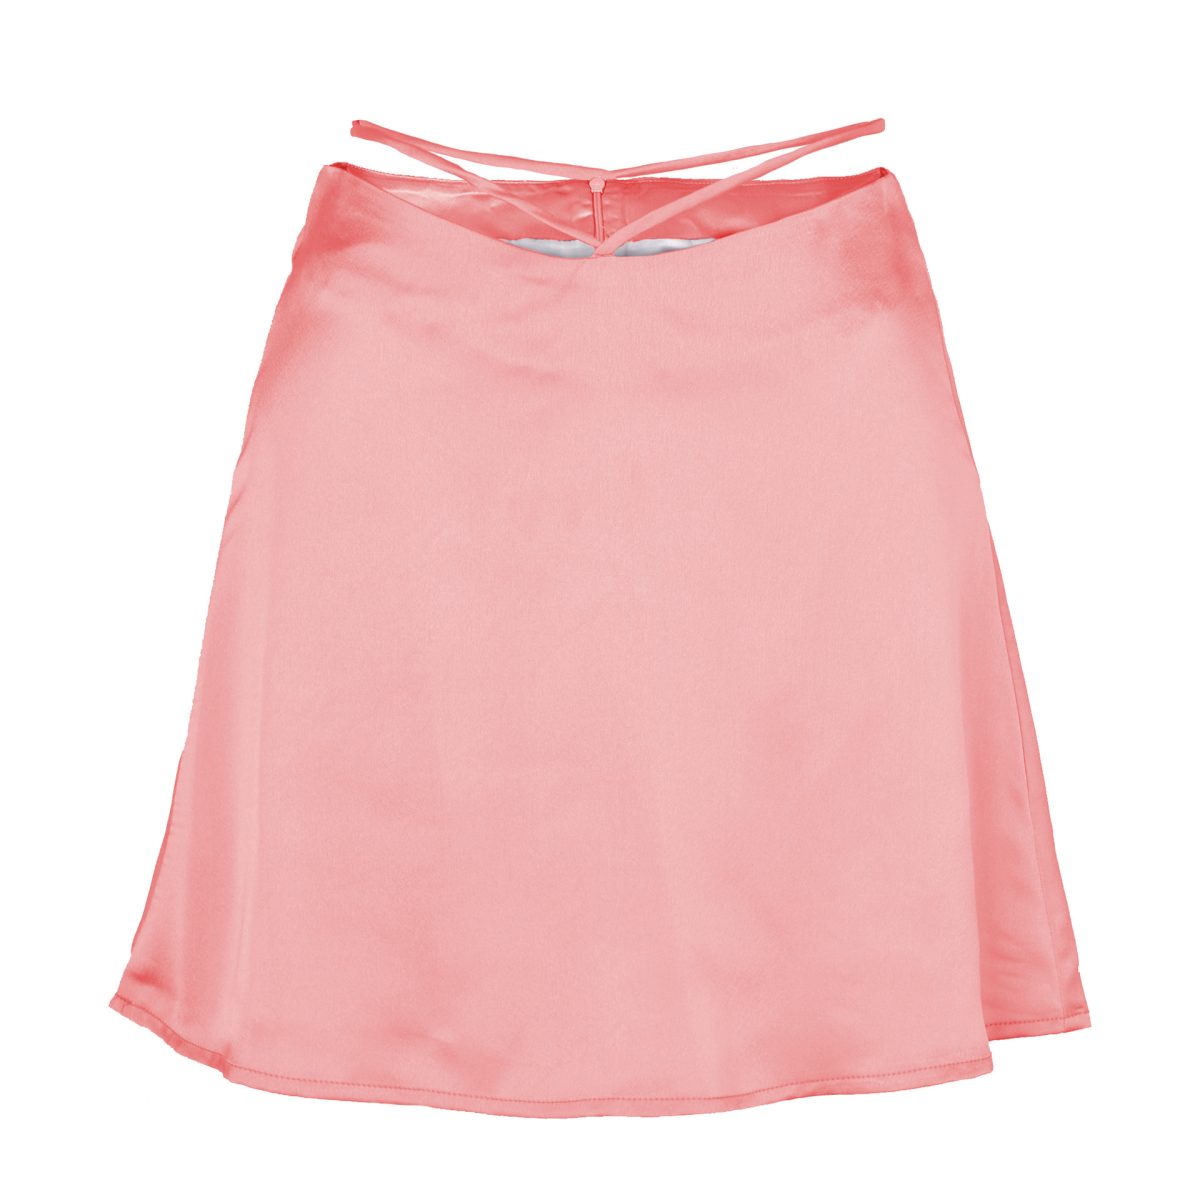 Cropped Lace-Up Skirt in Skirts